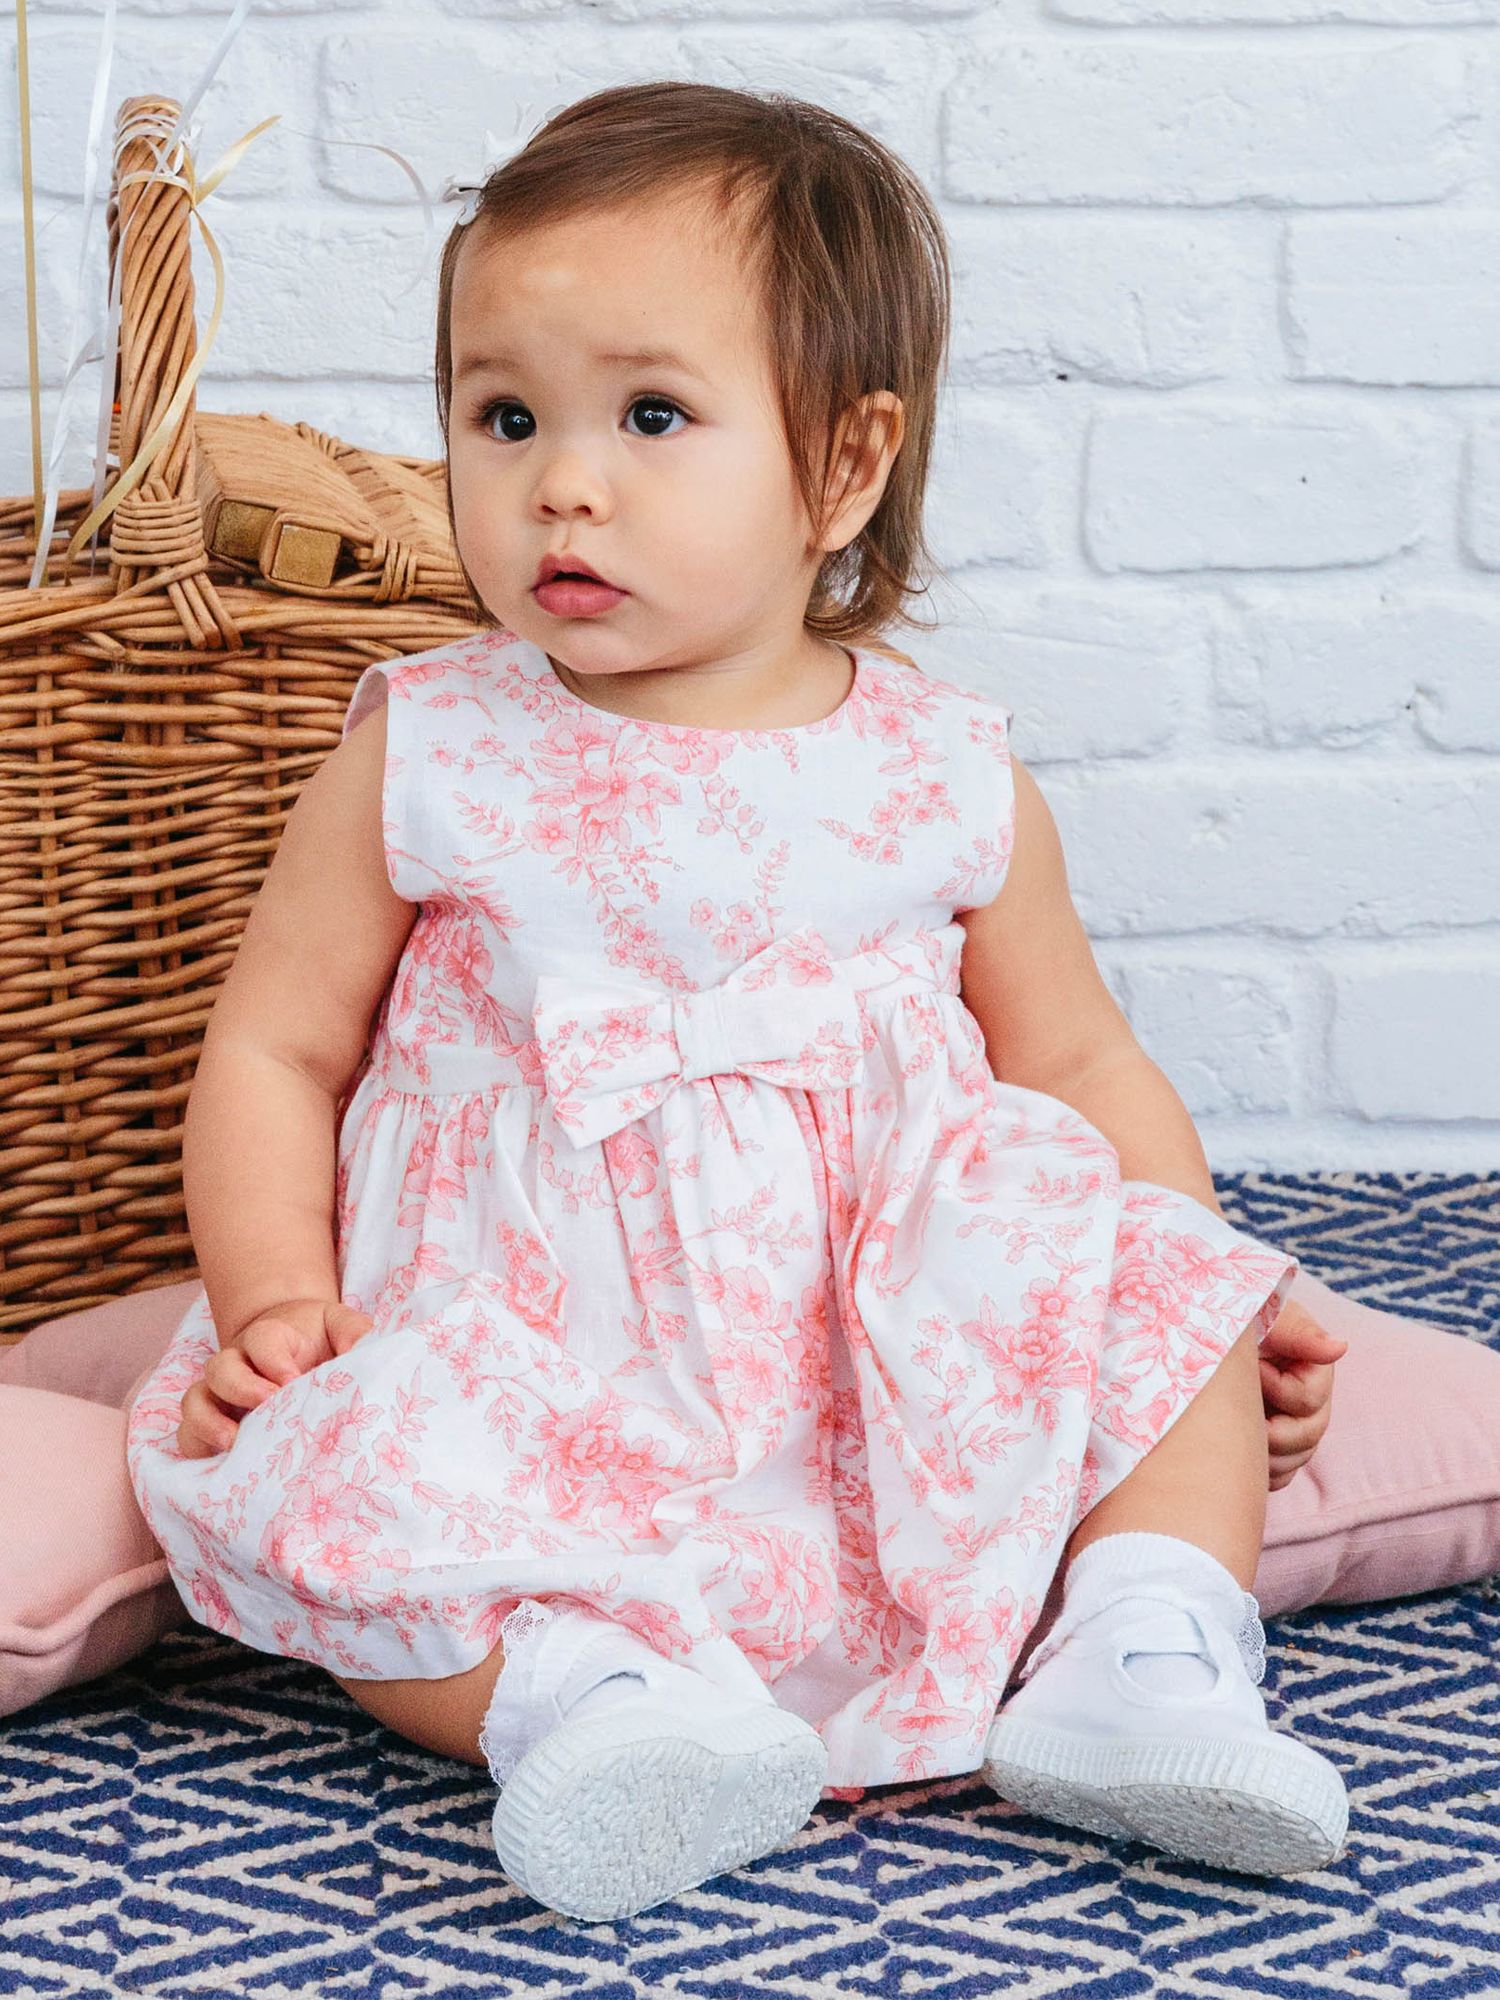 Buy Trotters Baby Maeva Floral Print Bow Dress Online at johnlewis.com